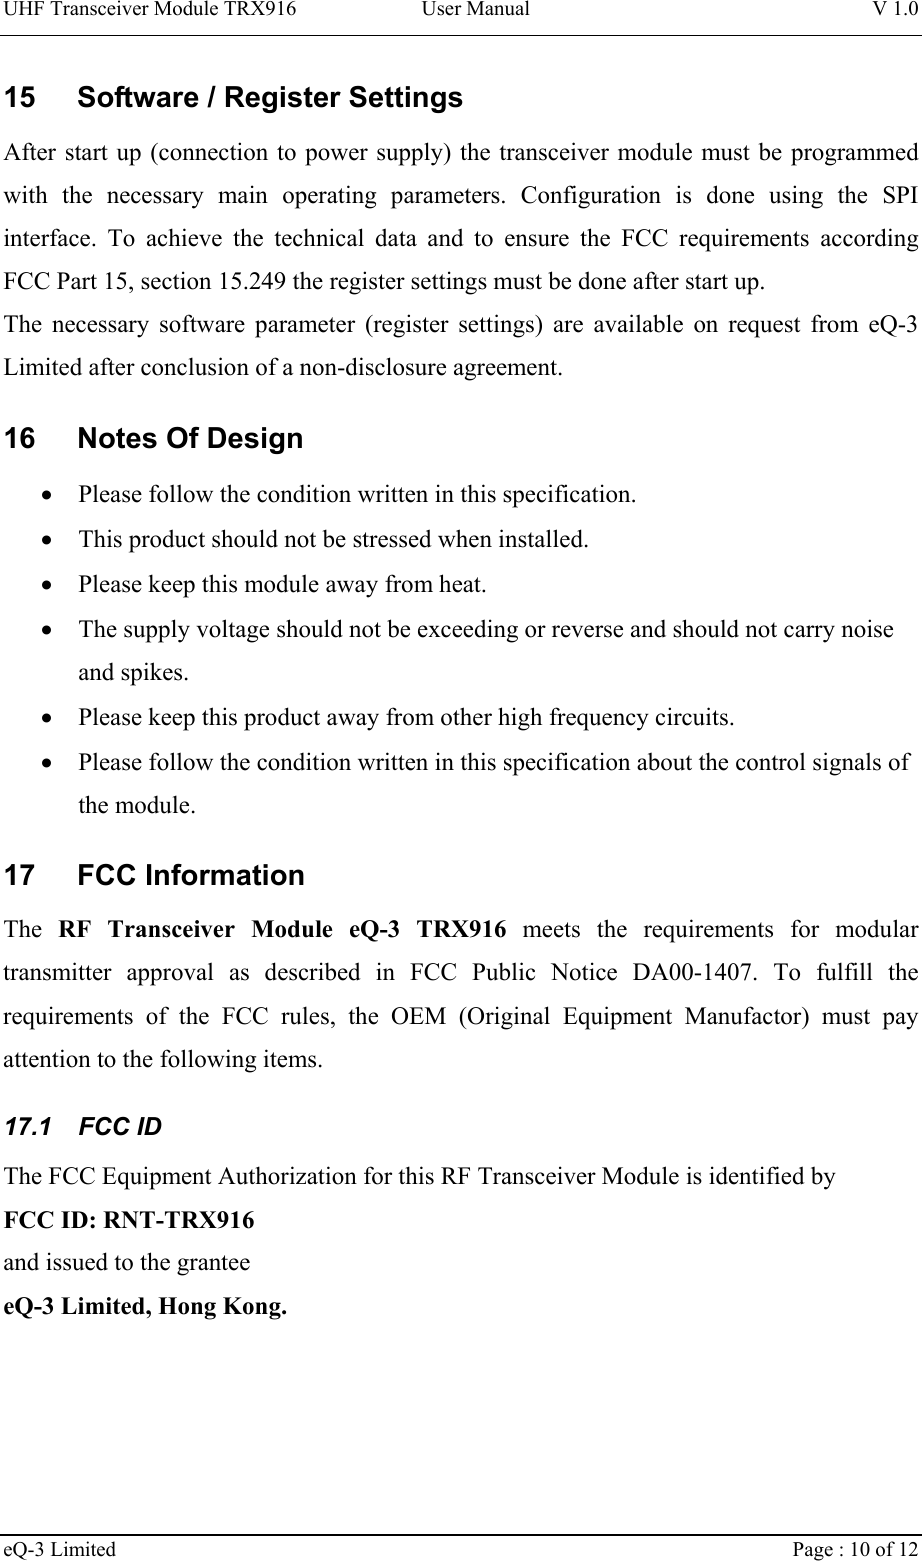 UHF Transceiver Module TRX916 User Manual  V 1.0 eQ-3 Limited    Page : 10 of 12 15  Software / Register Settings After start up (connection to power supply) the transceiver module must be programmed with the necessary main operating parameters. Configuration is done using the SPI interface. To achieve the technical data and to ensure the FCC requirements according FCC Part 15, section 15.249 the register settings must be done after start up.  The necessary software parameter (register settings) are available on request from eQ-3 Limited after conclusion of a non-disclosure agreement.  16  Notes Of Design •  Please follow the condition written in this specification. •  This product should not be stressed when installed. •  Please keep this module away from heat. •  The supply voltage should not be exceeding or reverse and should not carry noise and spikes. •  Please keep this product away from other high frequency circuits. •  Please follow the condition written in this specification about the control signals of the module. 17 FCC Information The  RF Transceiver Module eQ-3 TRX916 meets the requirements for modular transmitter approval as described in FCC Public Notice DA00-1407. To fulfill the requirements of the FCC rules, the OEM (Original Equipment Manufactor) must pay attention to the following items. 17.1 FCC ID The FCC Equipment Authorization for this RF Transceiver Module is identified by  FCC ID: RNT-TRX916 and issued to the grantee eQ-3 Limited, Hong Kong. 